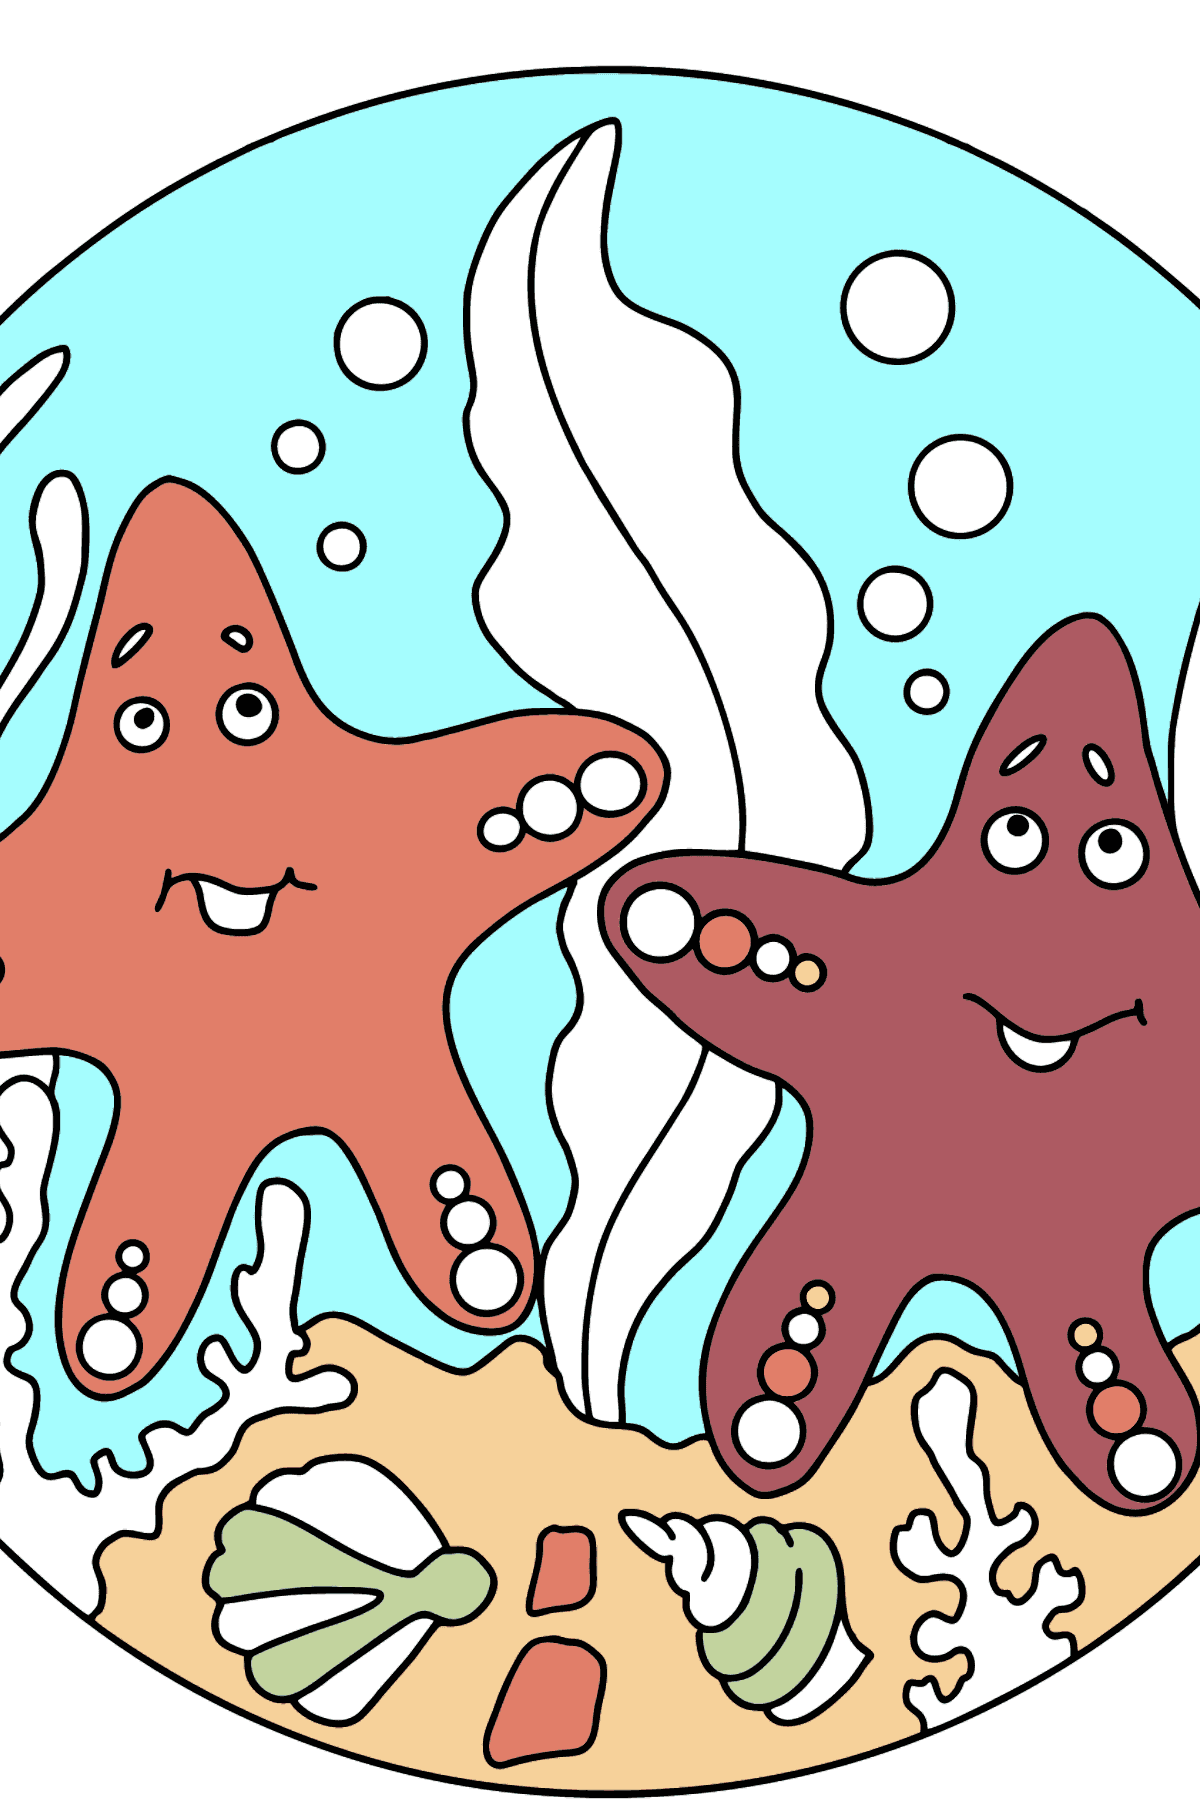 Two Starfish Coloring Page (Difficult) - Coloring Pages for Kids